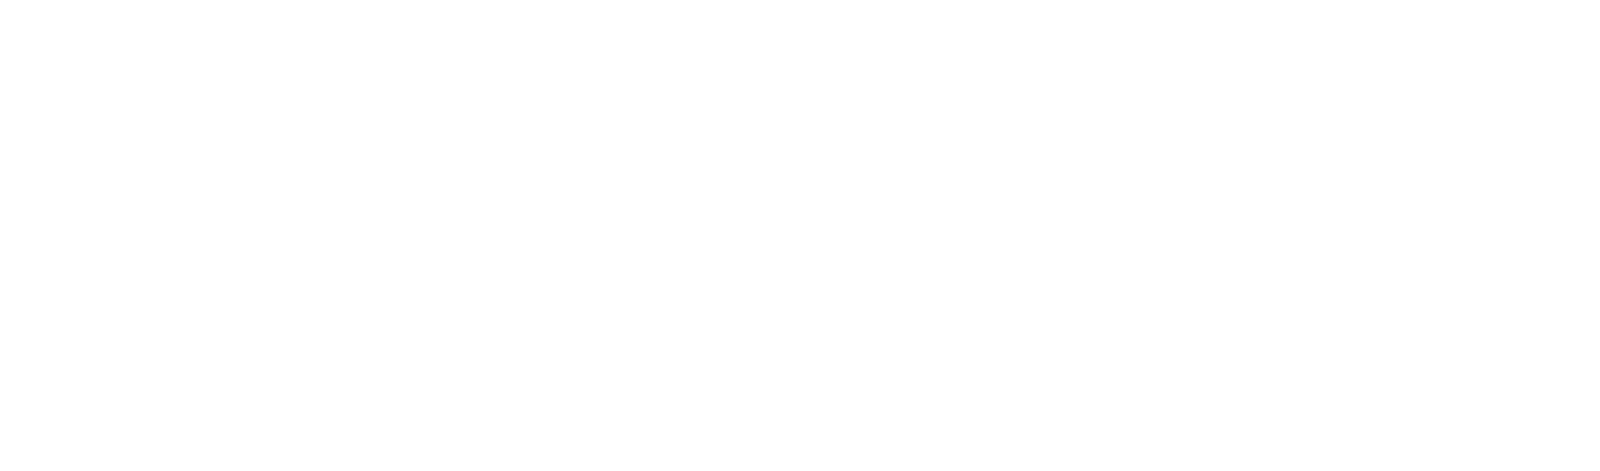 Codat - financial integrations made simple